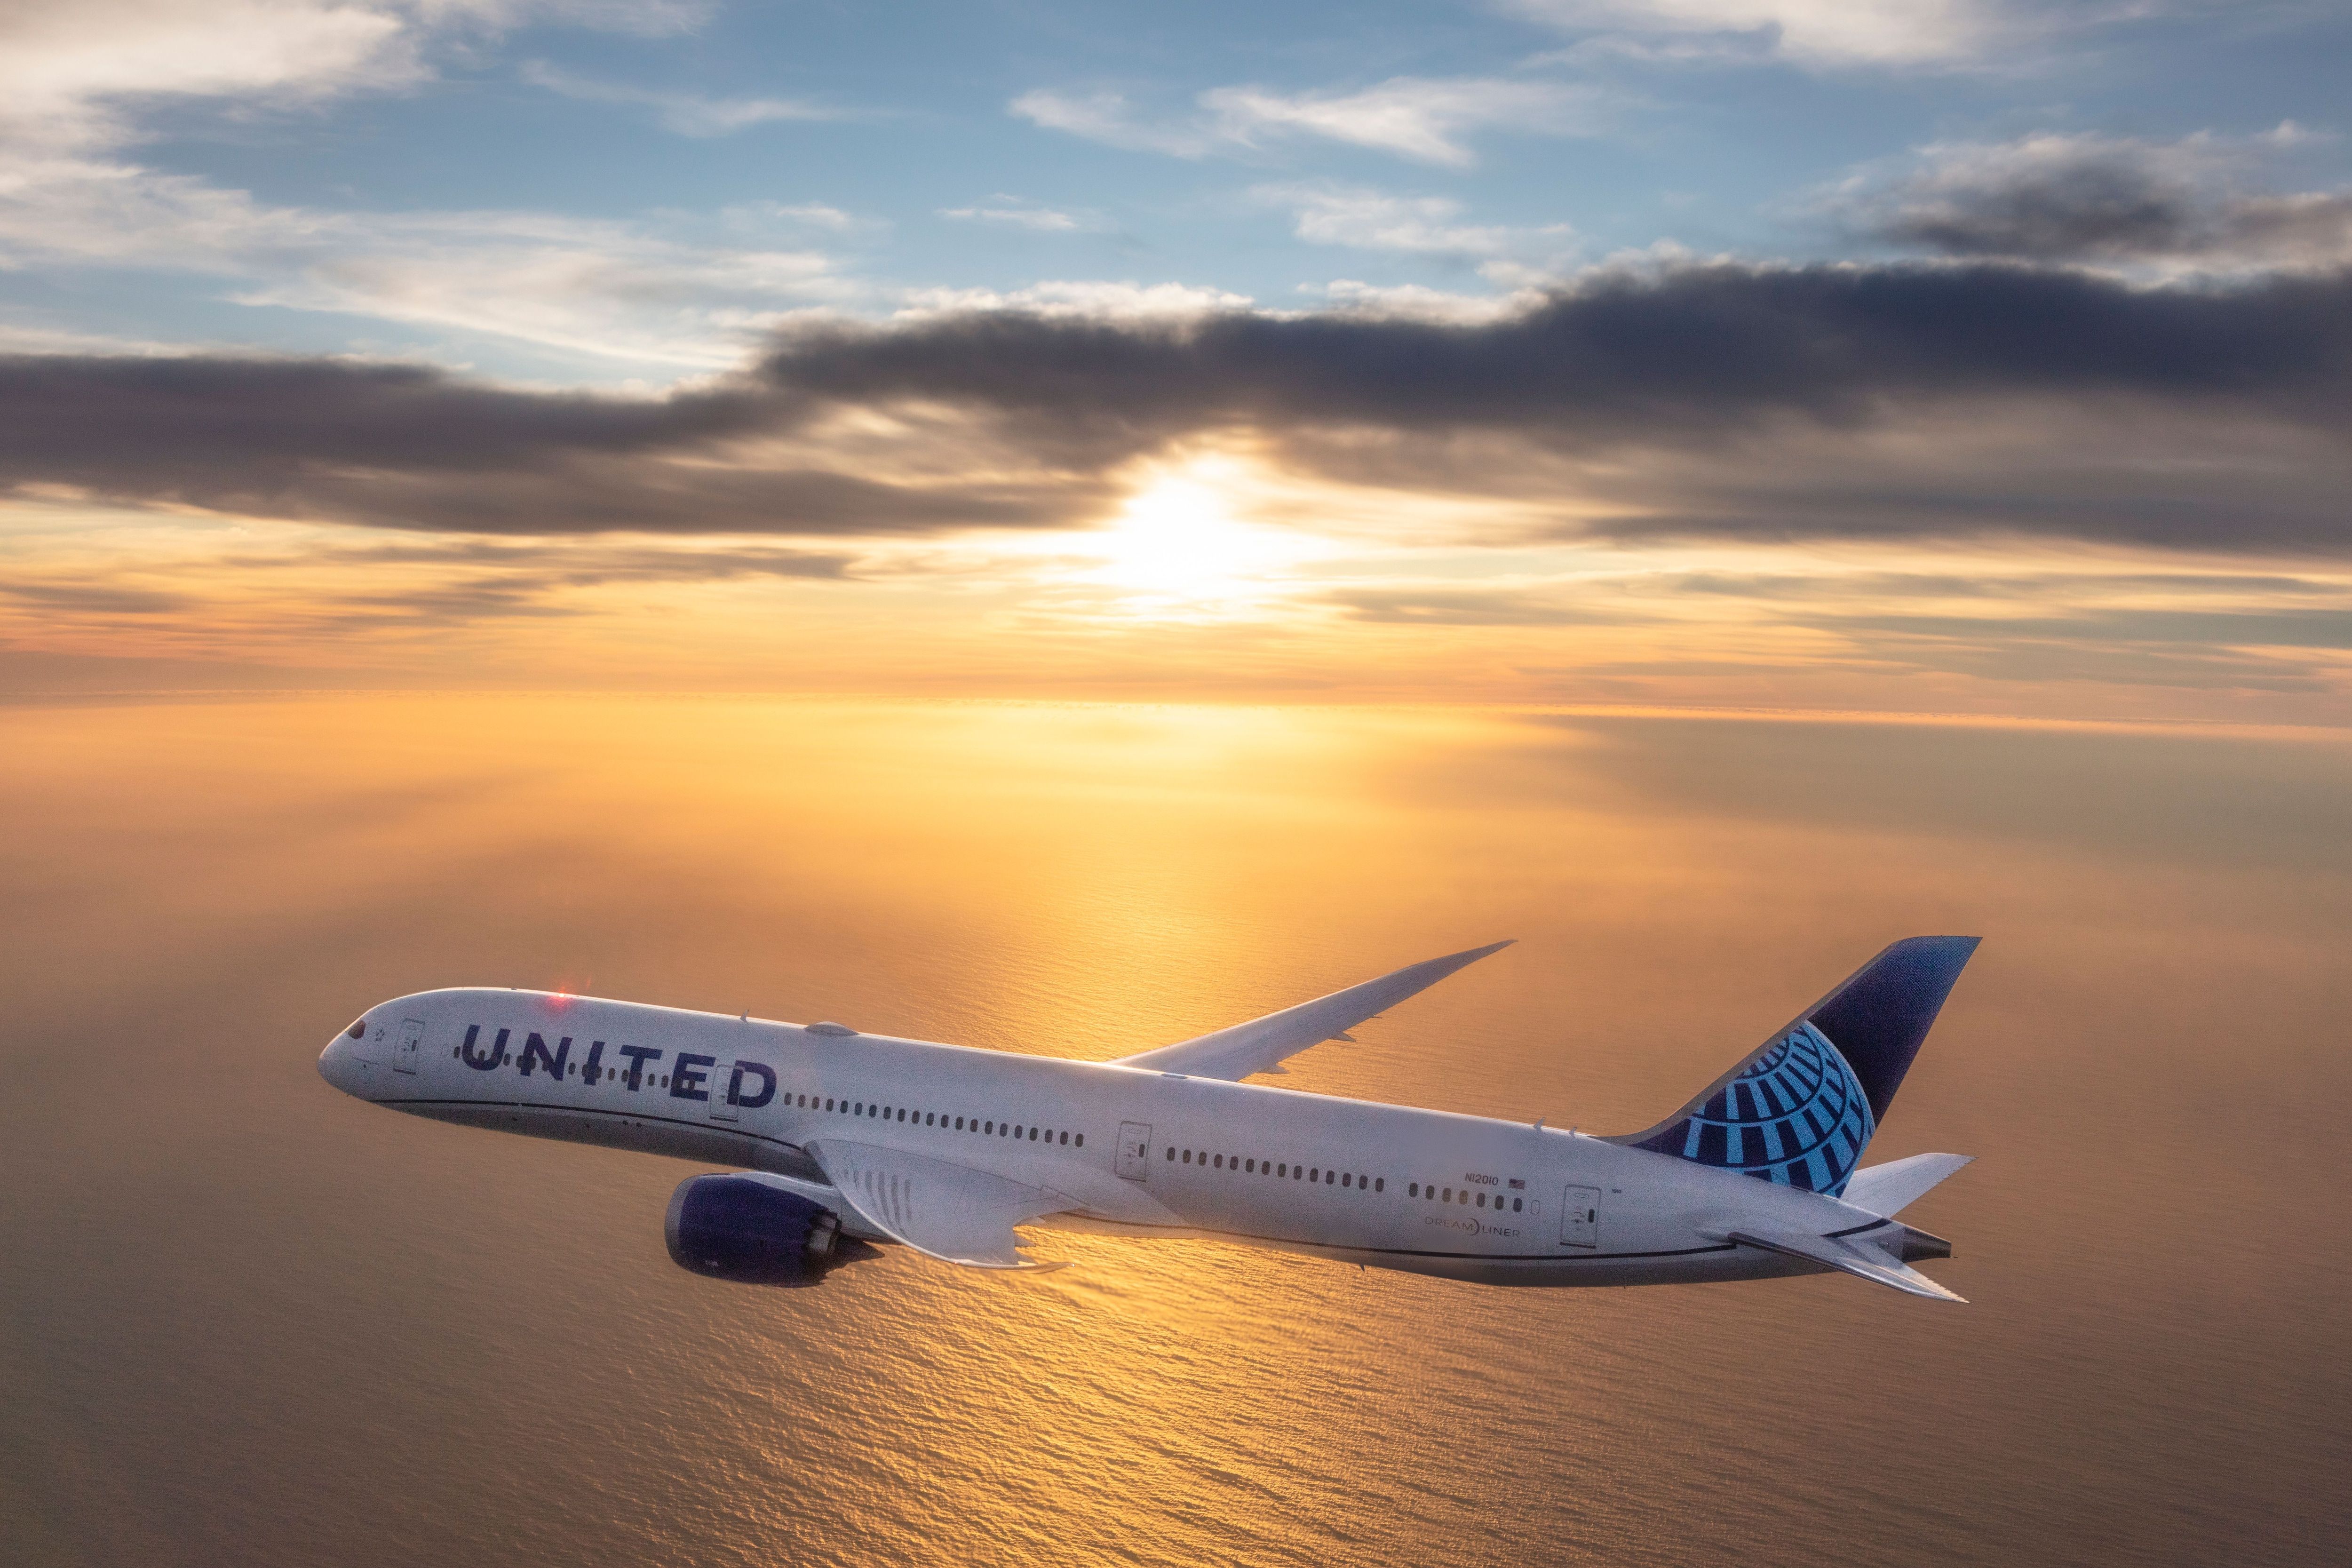 United 787 in Flight During Sunset